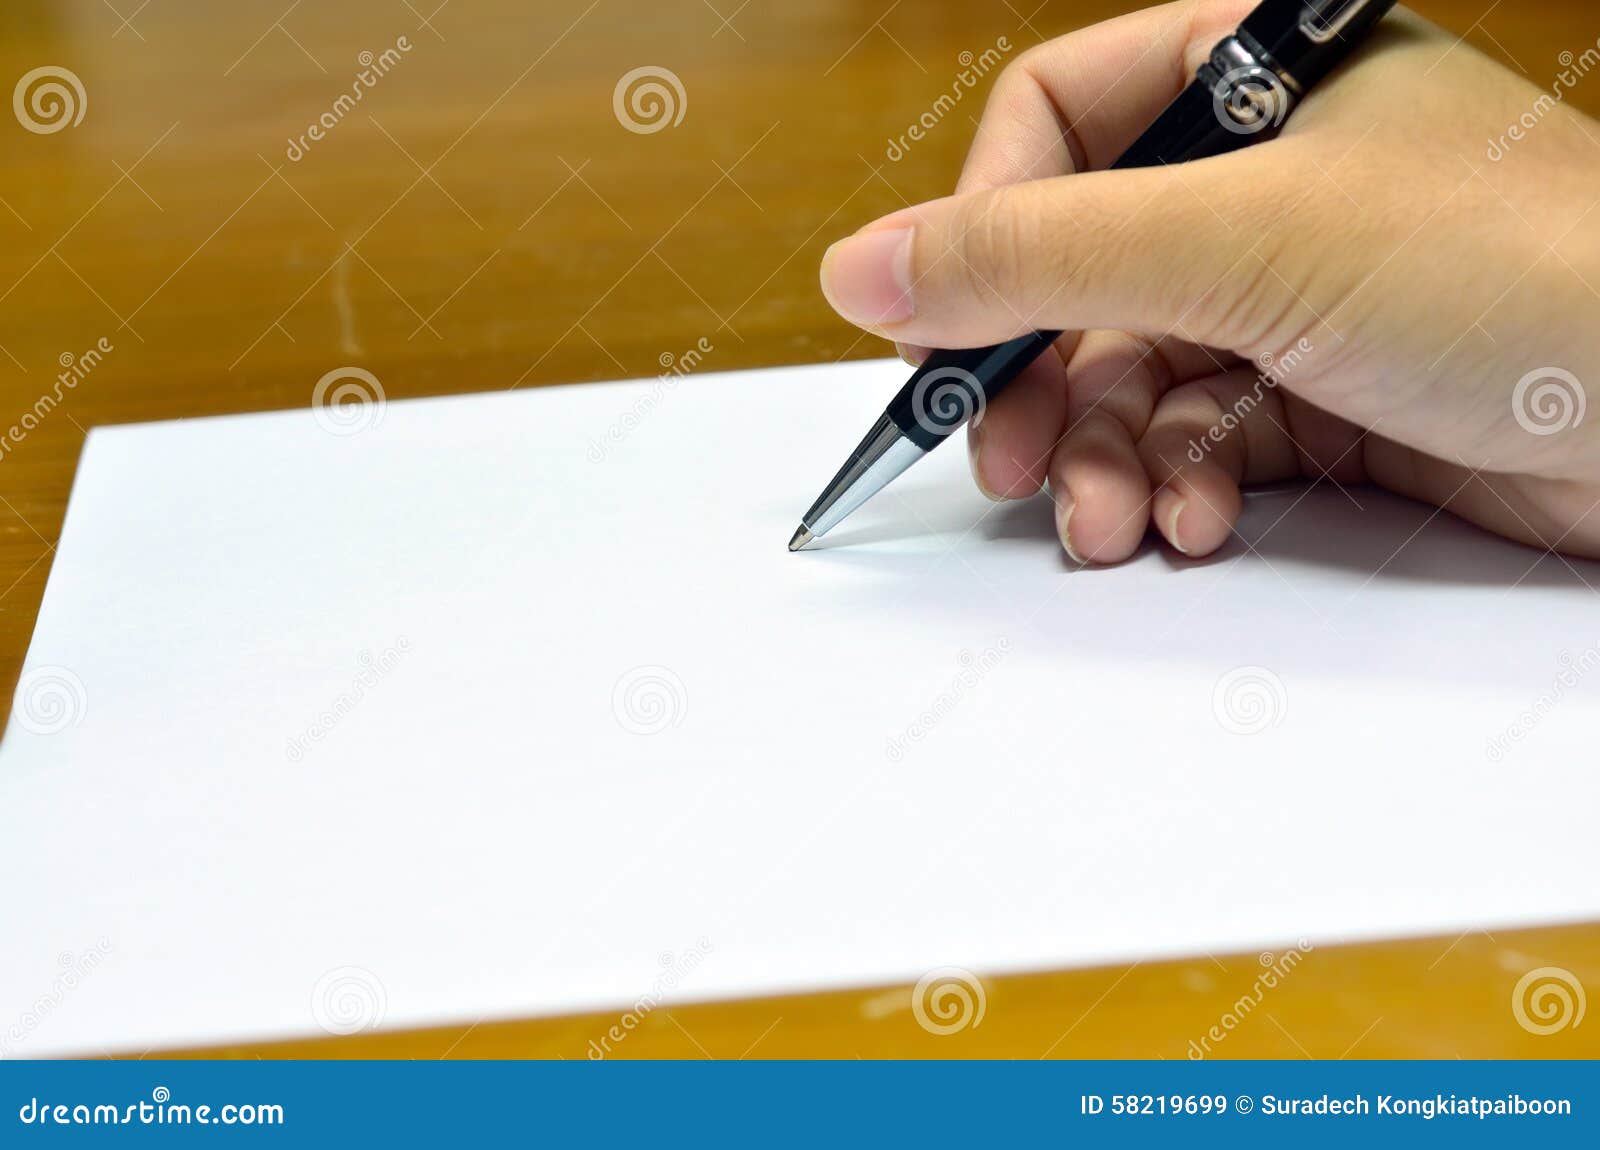 Hand with a Pen Writing on White Paper Stock Image - Image of ...